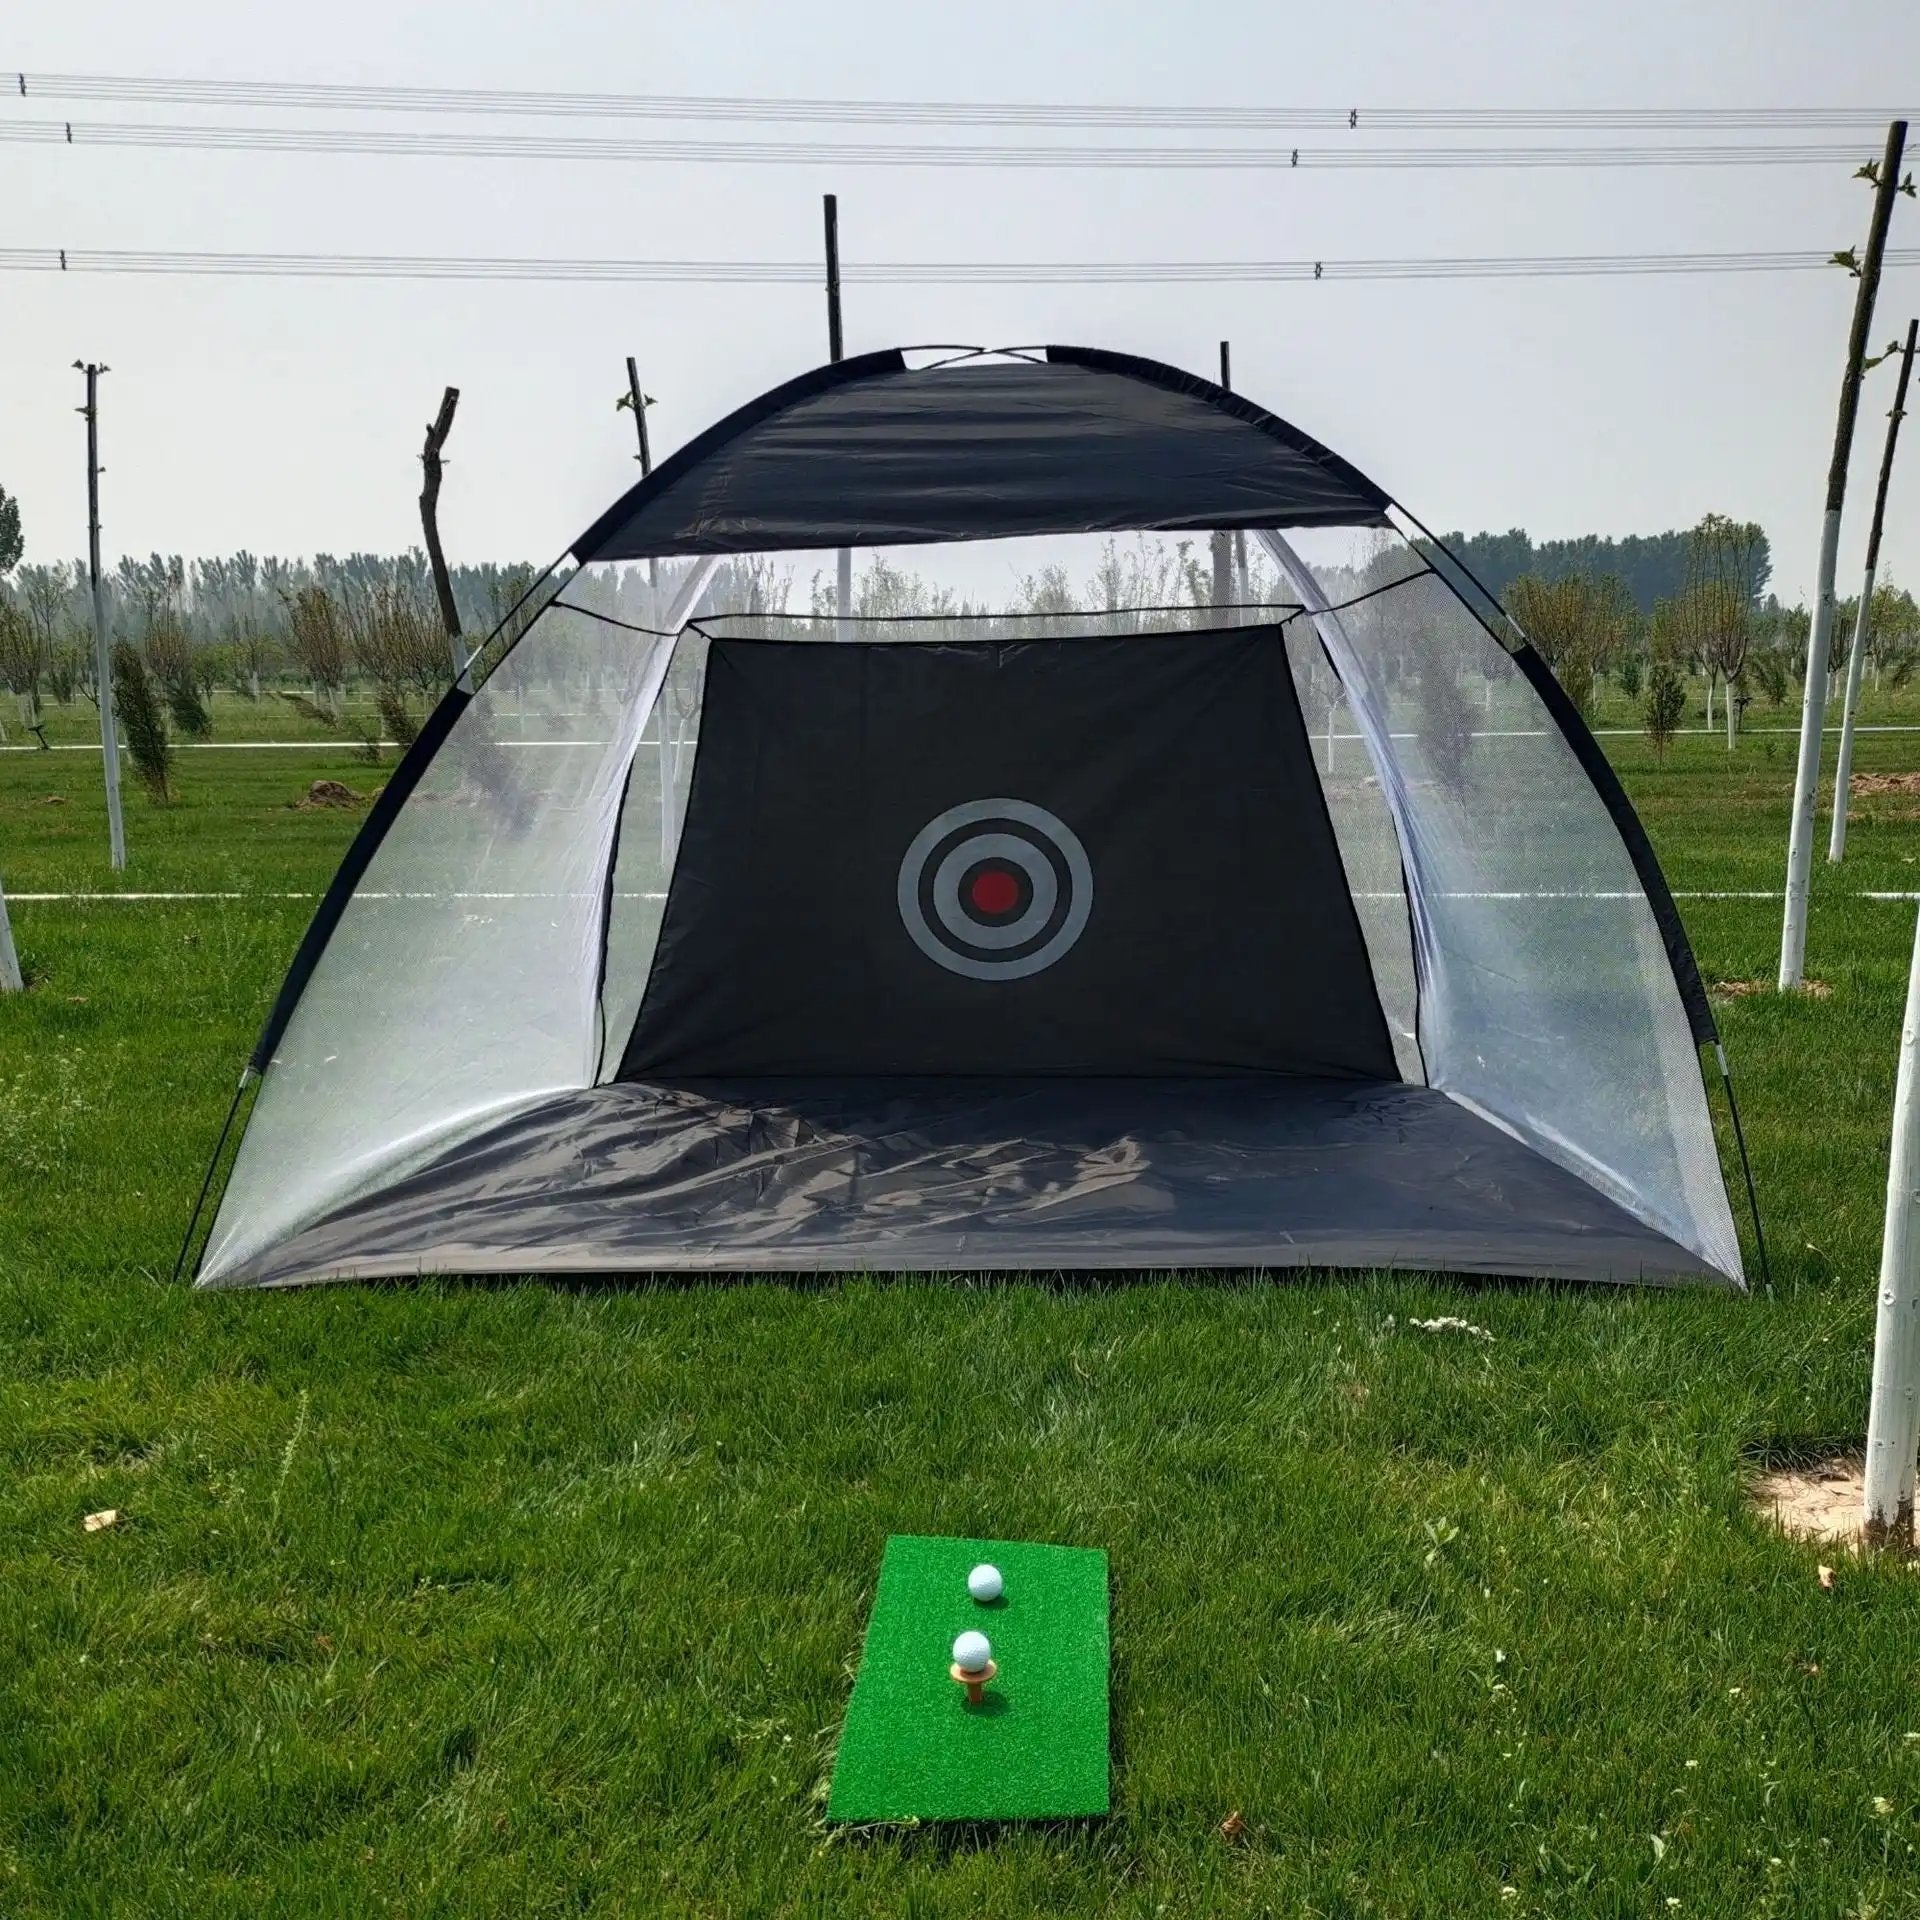 WILKYsExercise EquipmentGolf Practice Net Tent Golf Hitting Cage Garden Grassland Practice Ten
 Overview
 
 -This is a fantastic golf practice net cage for any golfer to practice outdoors in the comfort of their own backyard or nearby park.
 
 -It can be used